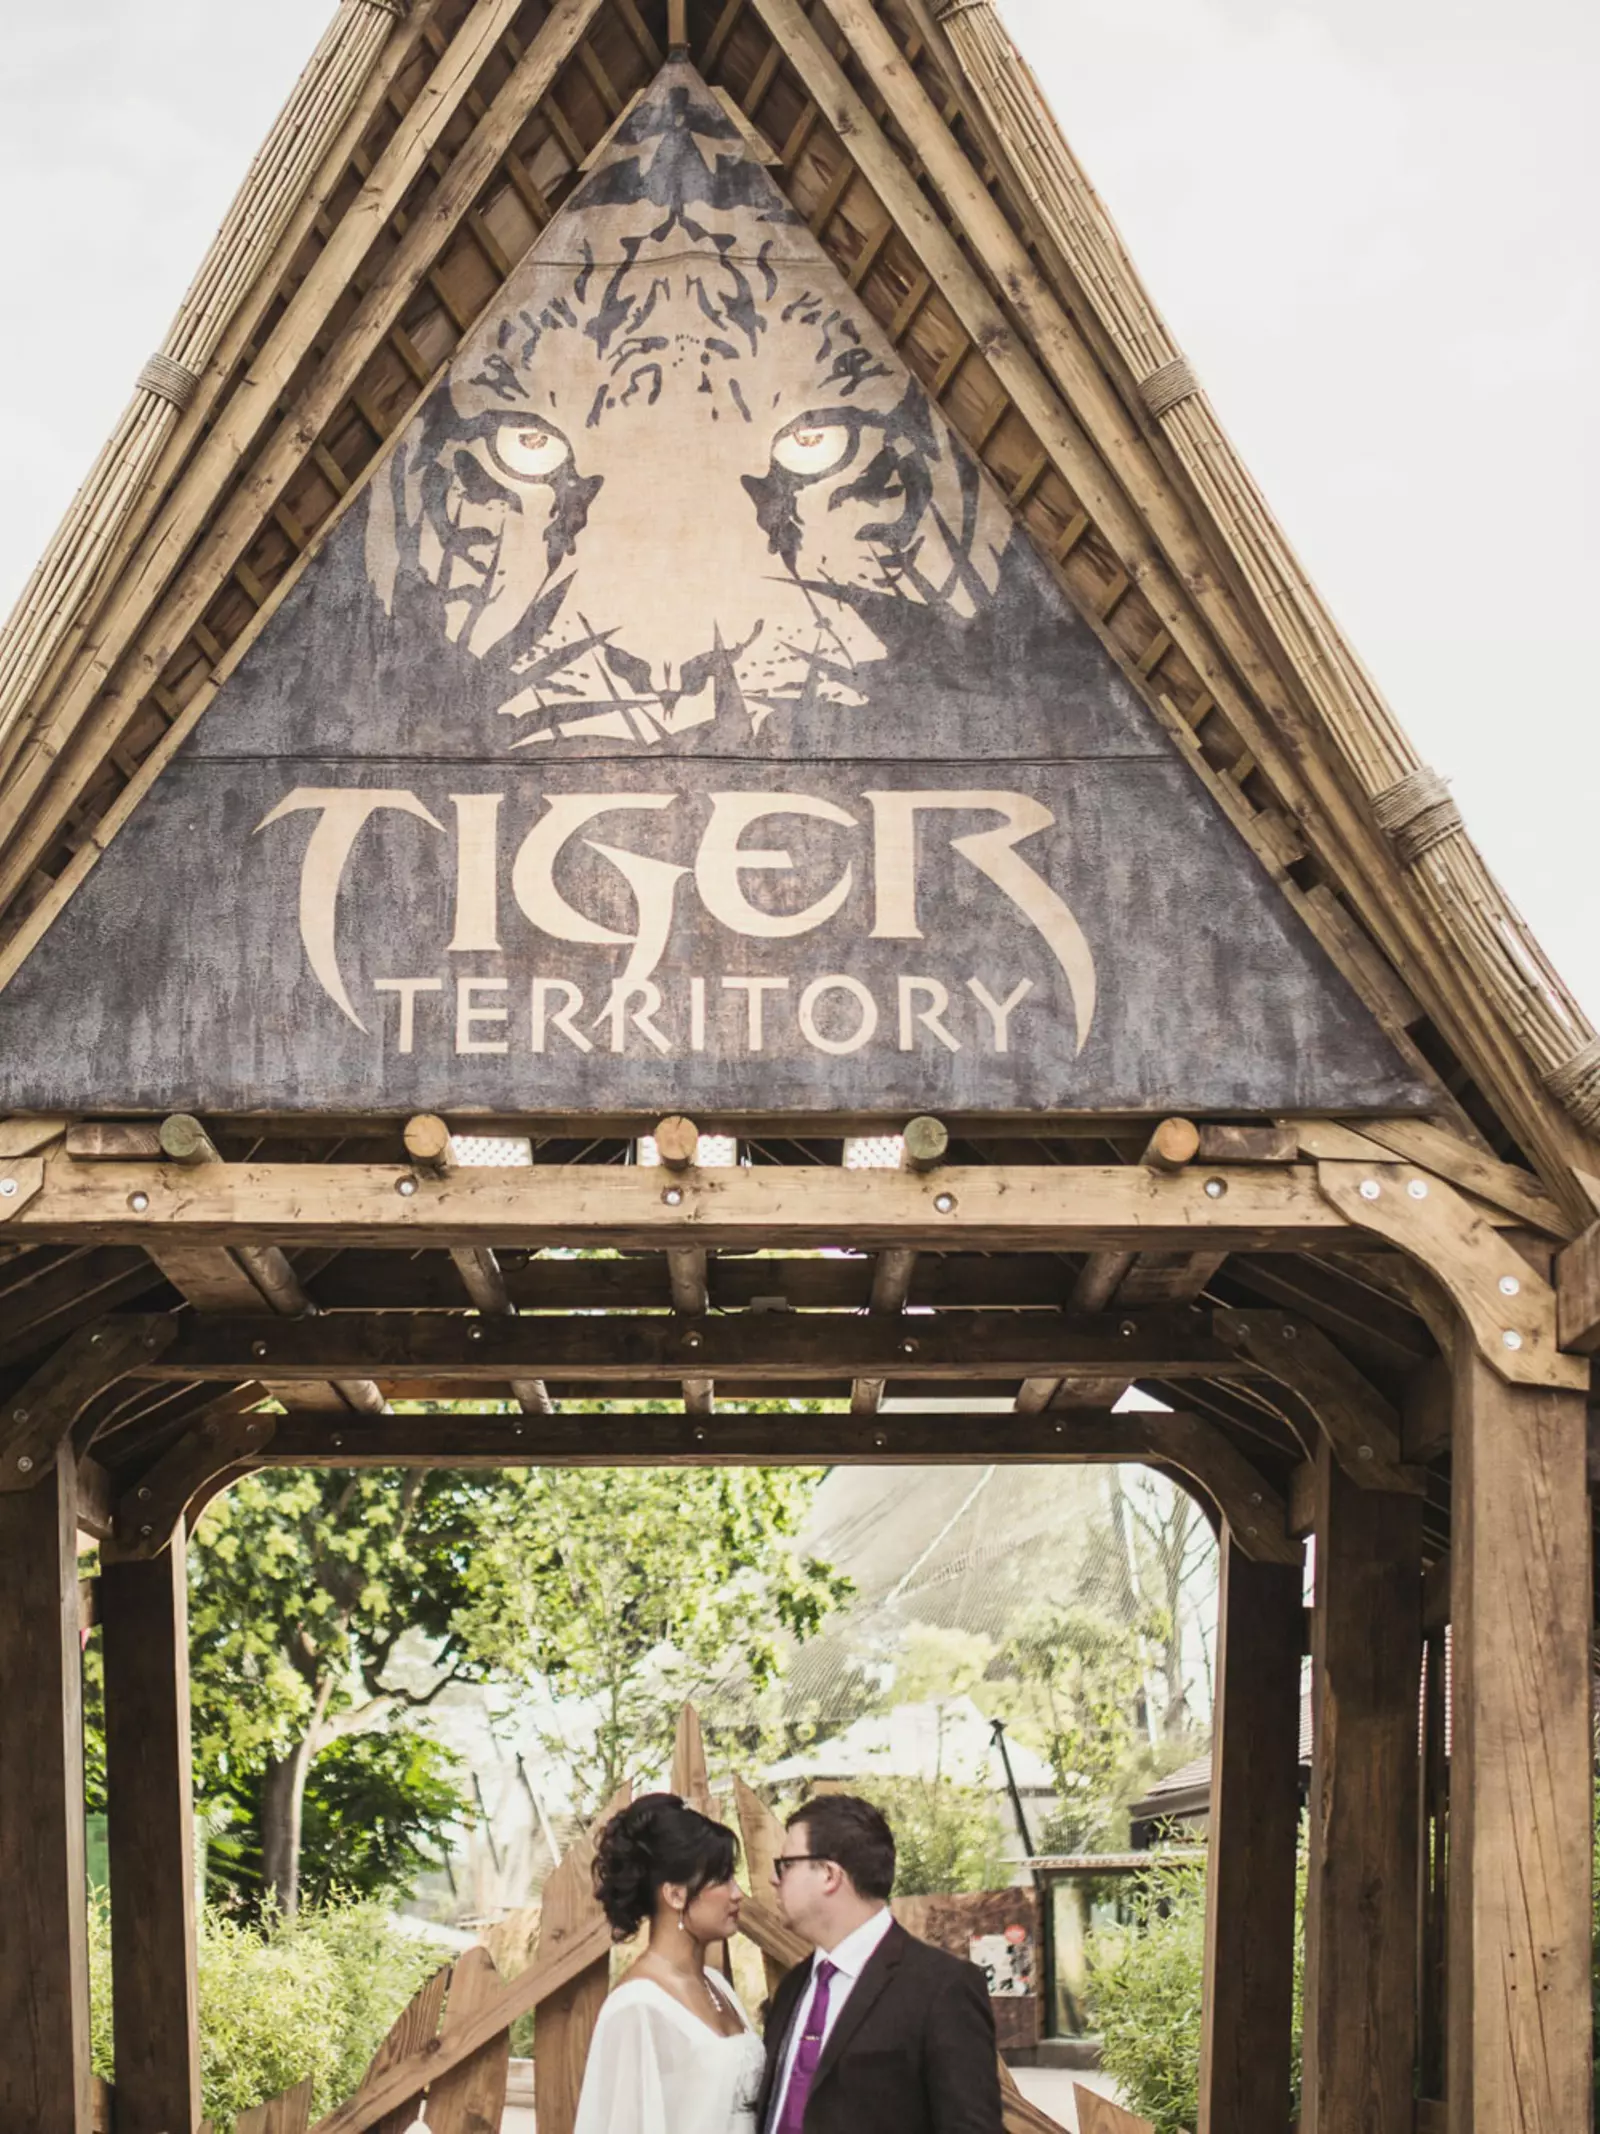 A wedding couple kiss at the entrance to Tiger Territory 